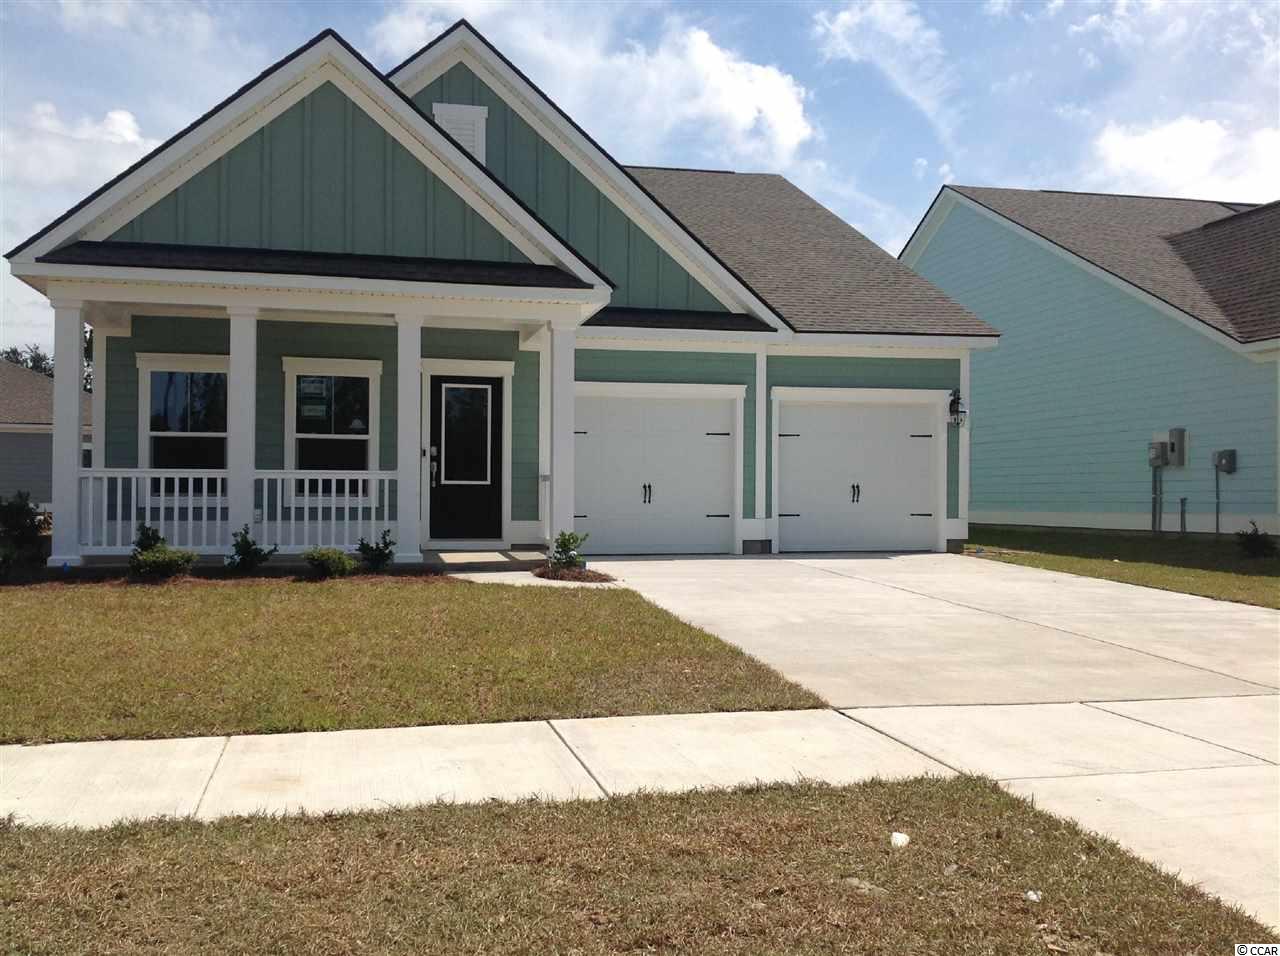 964 Piping Plover Ln. Myrtle Beach, SC 29577